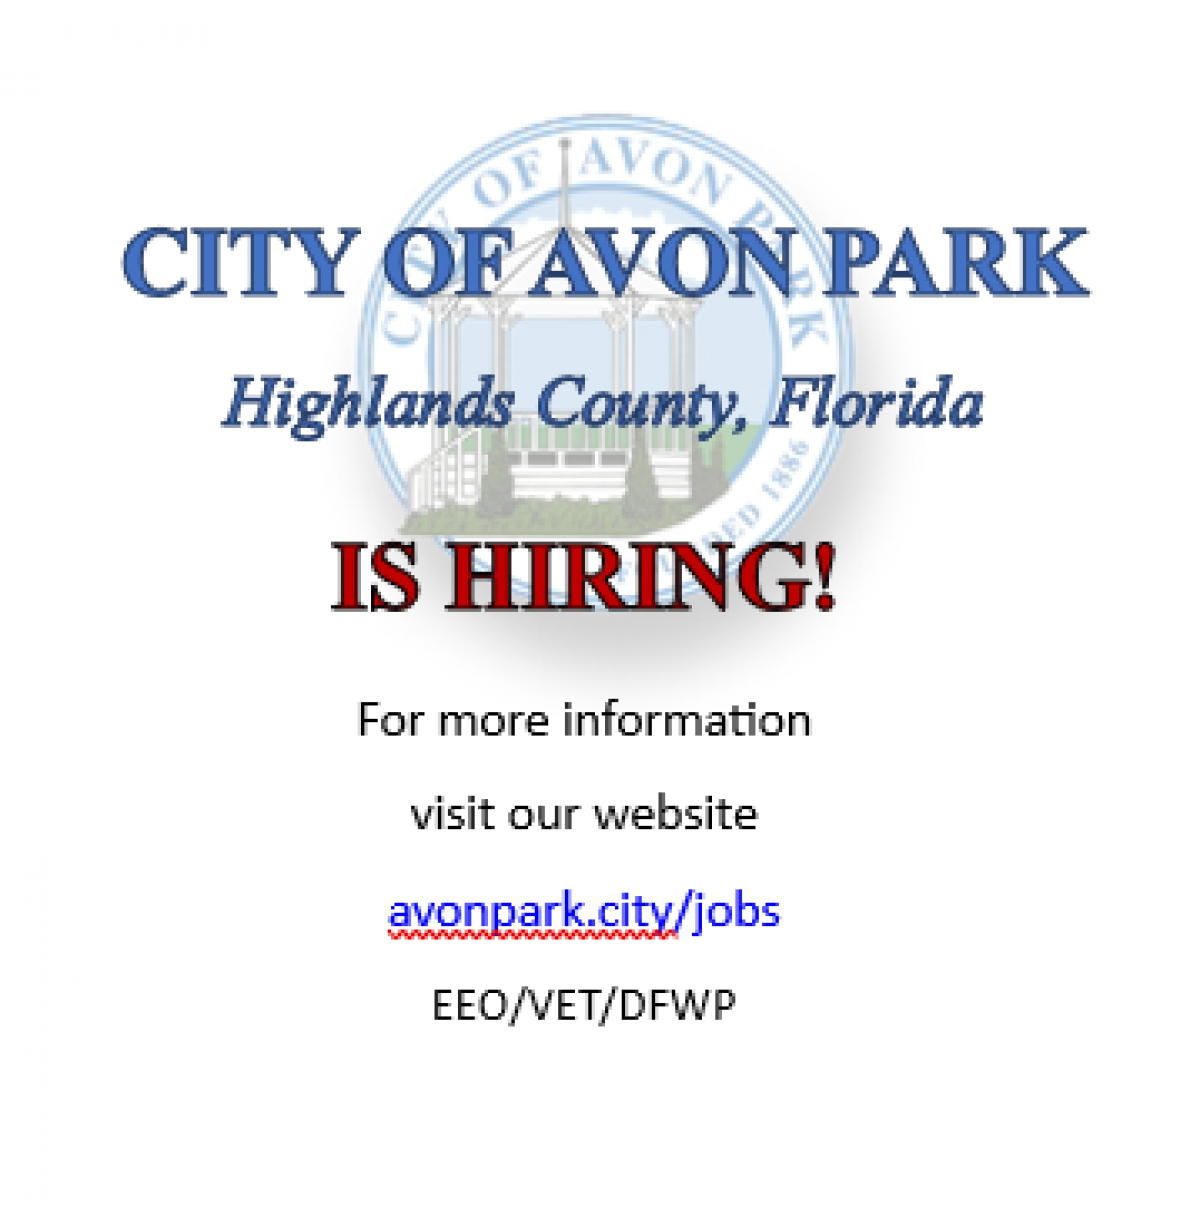 Image of with wording that the City of Avon Park is hiring.